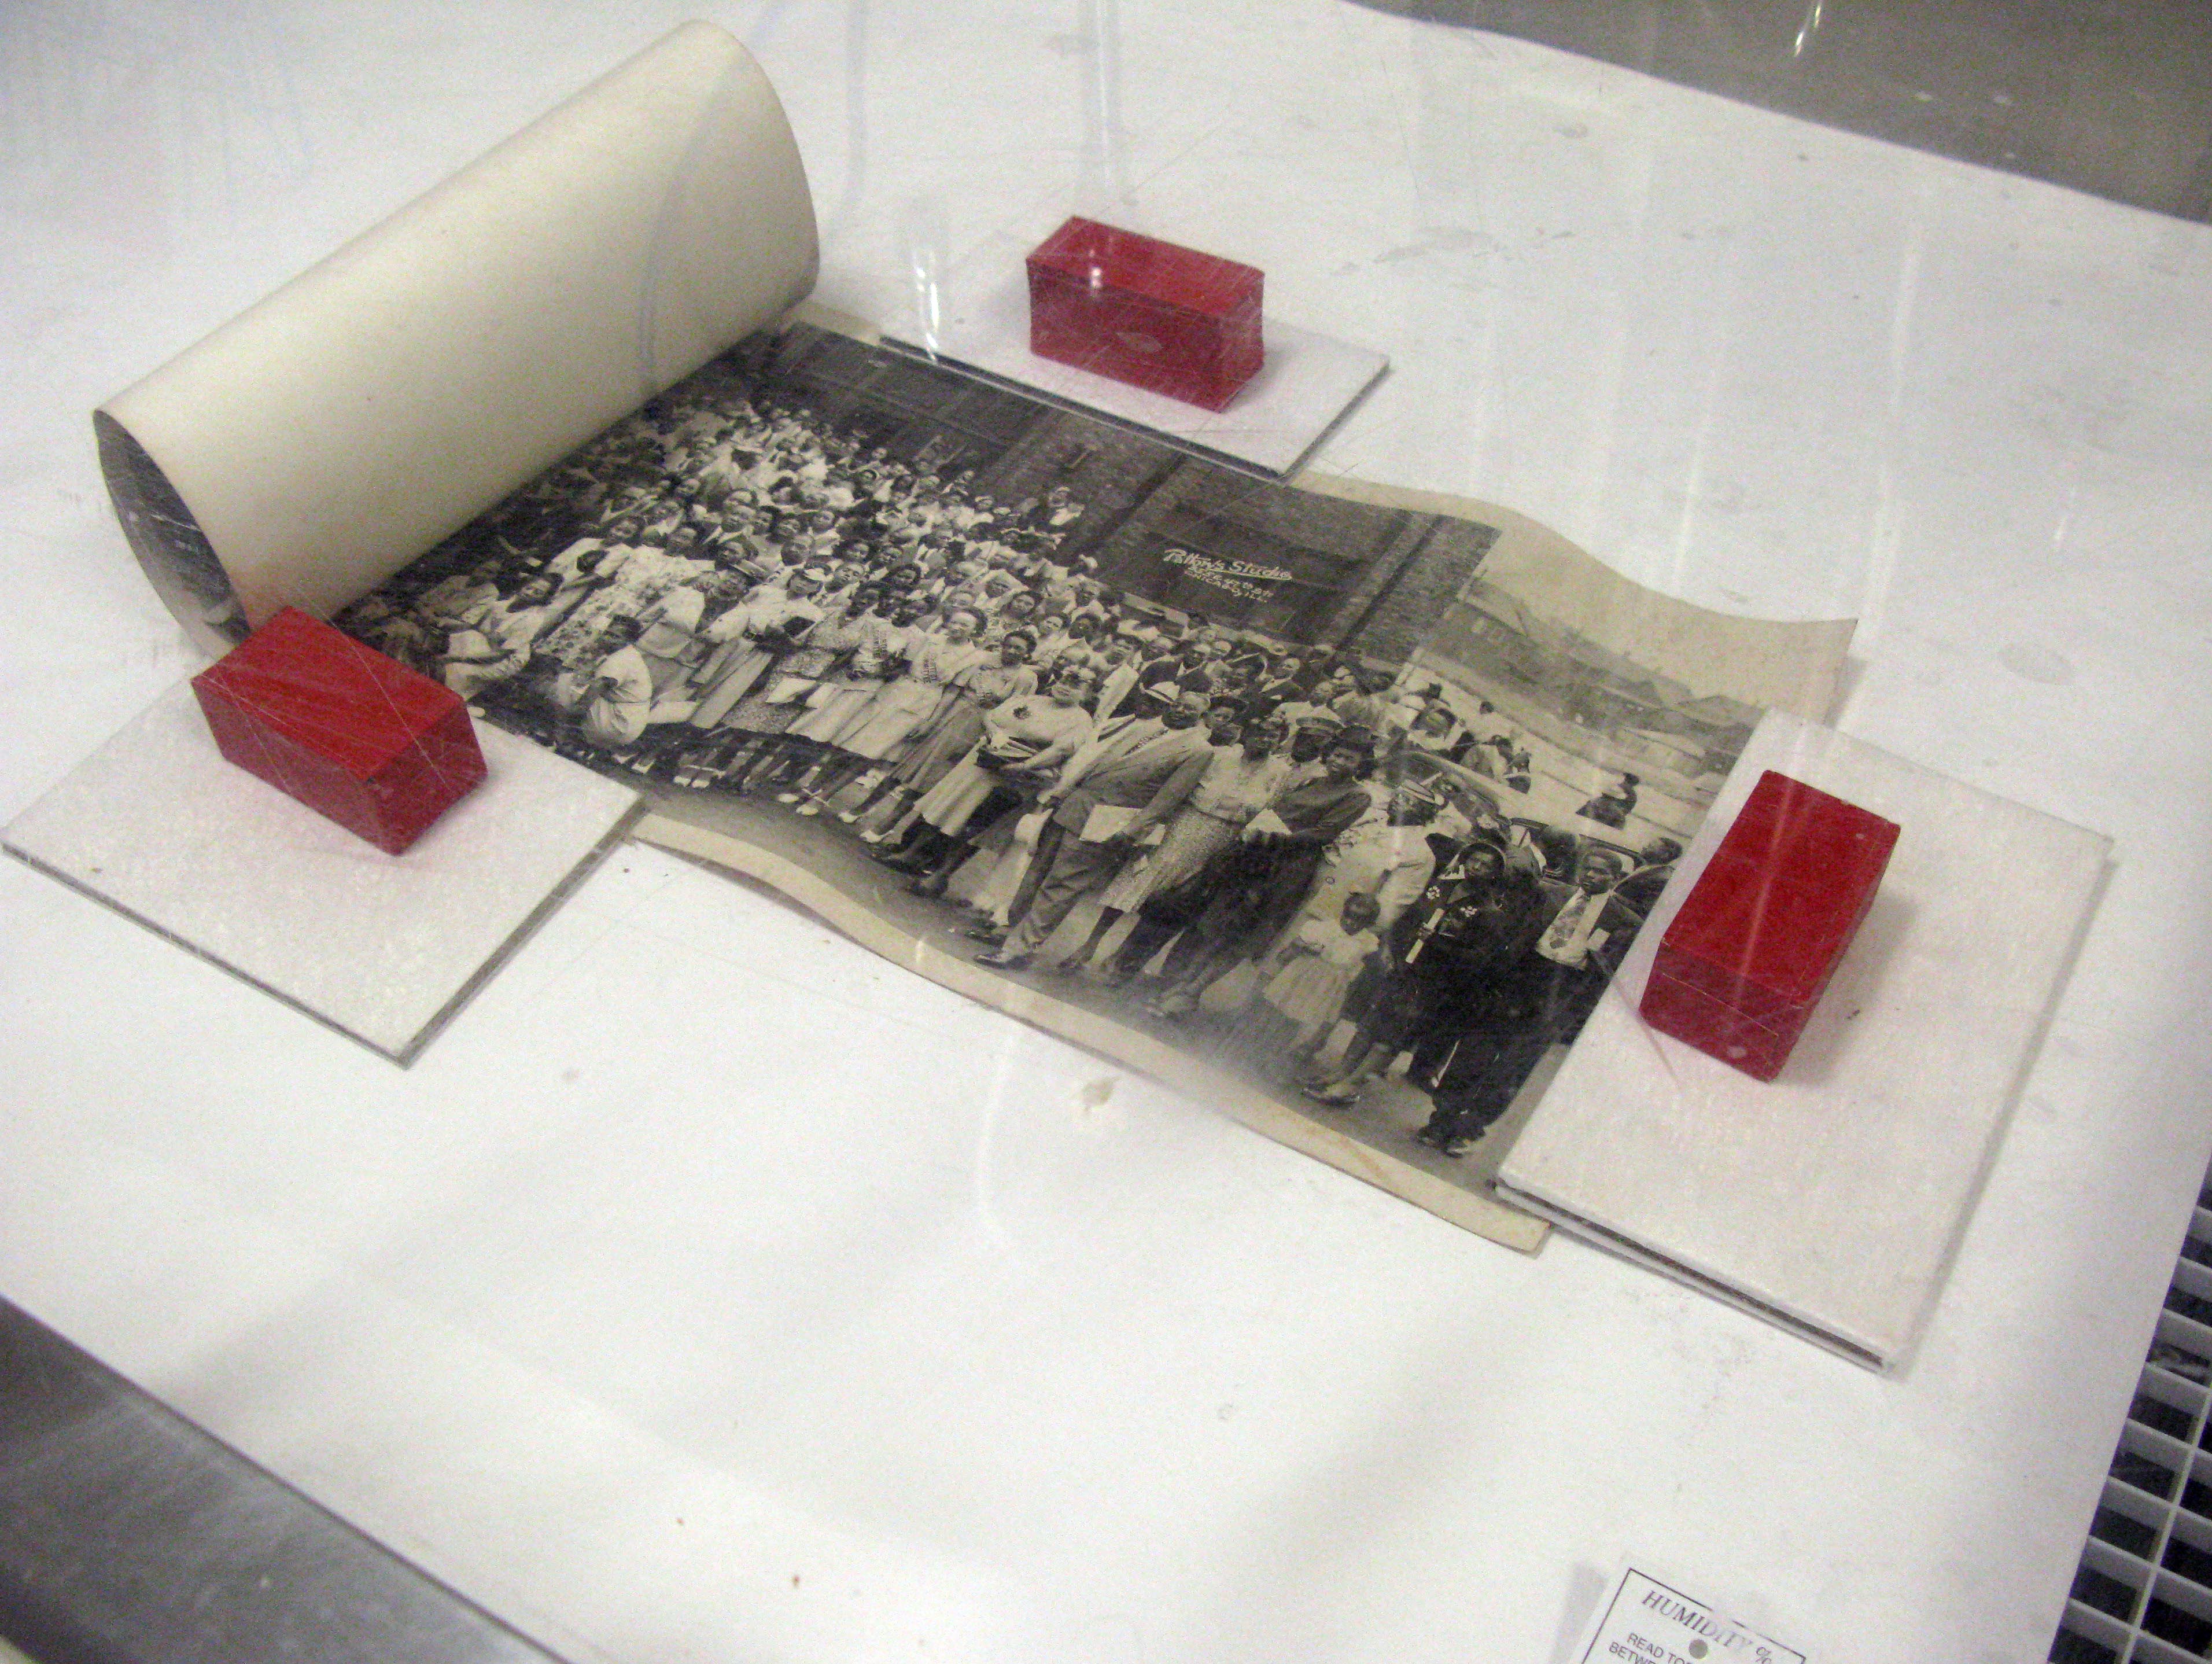 Image of unrolling a humidified photograph.